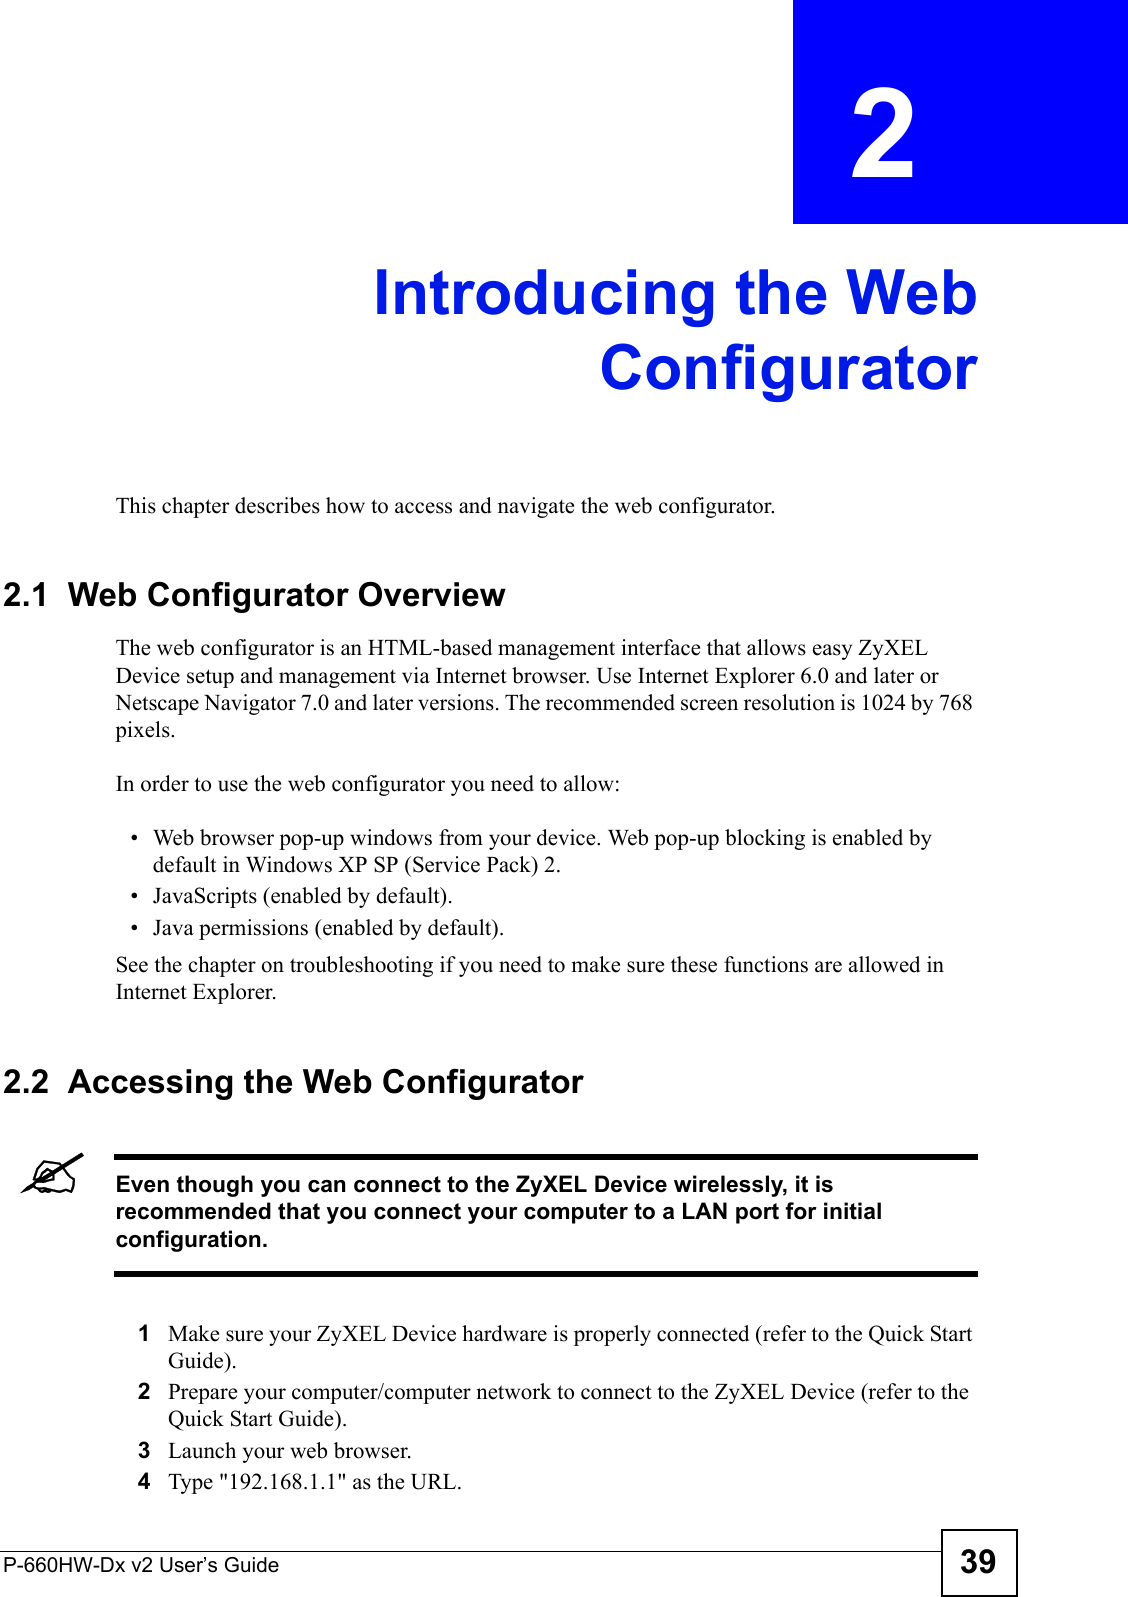 P-660HW-Dx v2 User’s Guide 39CHAPTER  2 Introducing the WebConfiguratorThis chapter describes how to access and navigate the web configurator.2.1  Web Configurator OverviewThe web configurator is an HTML-based management interface that allows easy ZyXEL Device setup and management via Internet browser. Use Internet Explorer 6.0 and later or Netscape Navigator 7.0 and later versions. The recommended screen resolution is 1024 by 768 pixels.In order to use the web configurator you need to allow:• Web browser pop-up windows from your device. Web pop-up blocking is enabled by default in Windows XP SP (Service Pack) 2.• JavaScripts (enabled by default).• Java permissions (enabled by default).See the chapter on troubleshooting if you need to make sure these functions are allowed in Internet Explorer. 2.2  Accessing the Web Configurator &quot;Even though you can connect to the ZyXEL Device wirelessly, it is recommended that you connect your computer to a LAN port for initial configuration.1Make sure your ZyXEL Device hardware is properly connected (refer to the Quick Start Guide).2Prepare your computer/computer network to connect to the ZyXEL Device (refer to the Quick Start Guide).3Launch your web browser.4Type &quot;192.168.1.1&quot; as the URL.